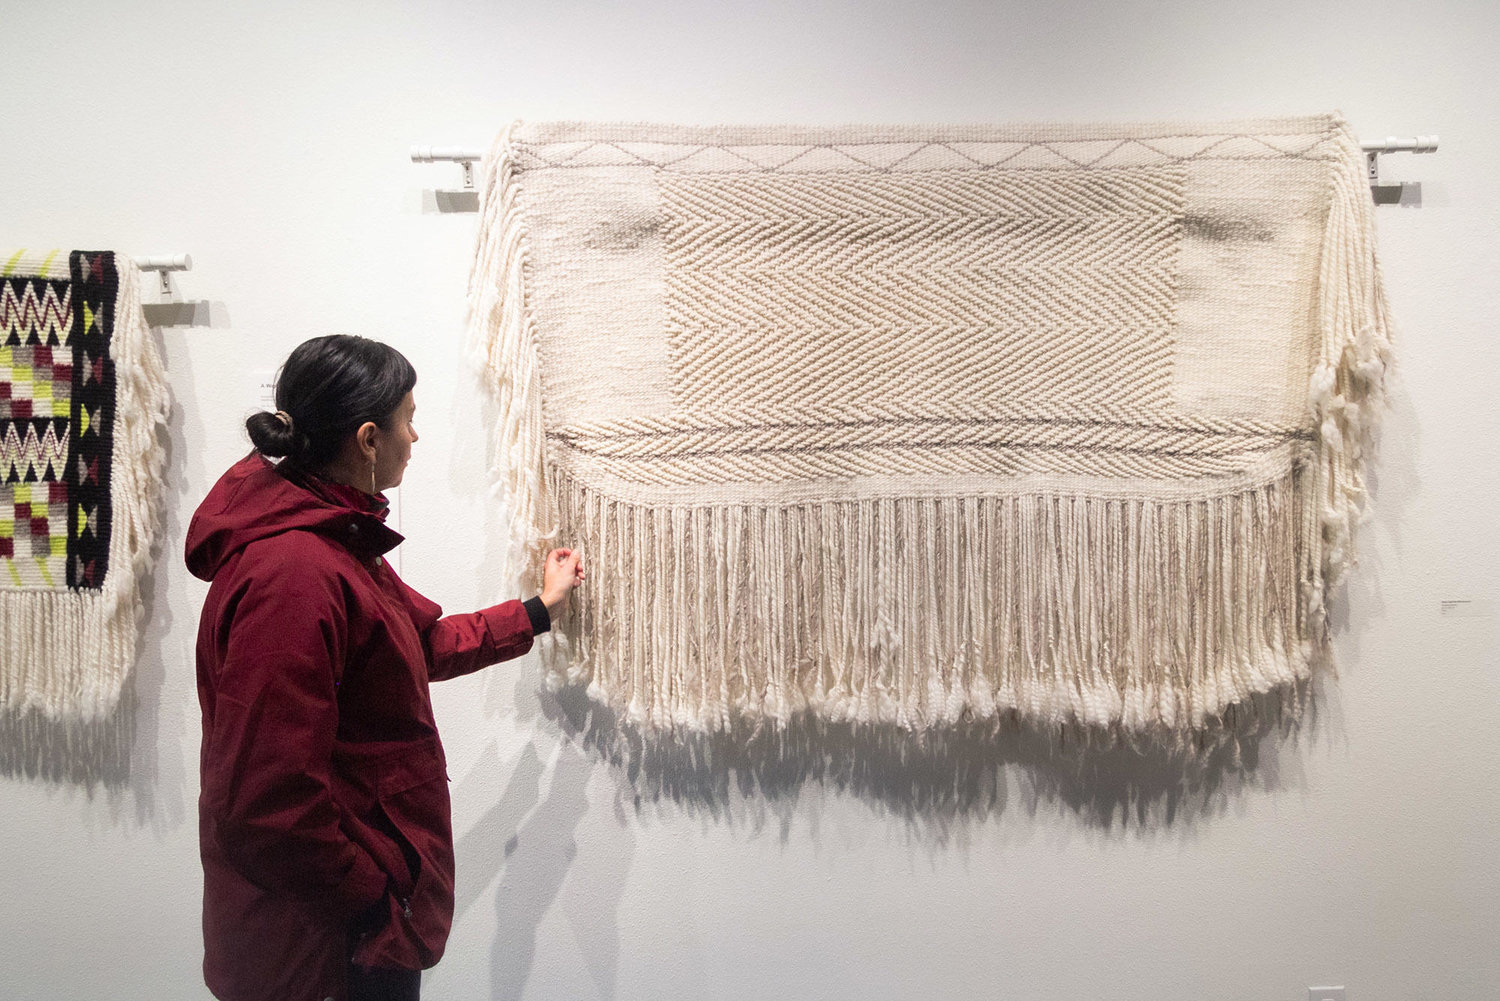 Selena Kearney curated the show “A Weaver’s Voice” to reflect the lineage of teachers and students who are keeping alive the tradition of Coast Salish weaving.